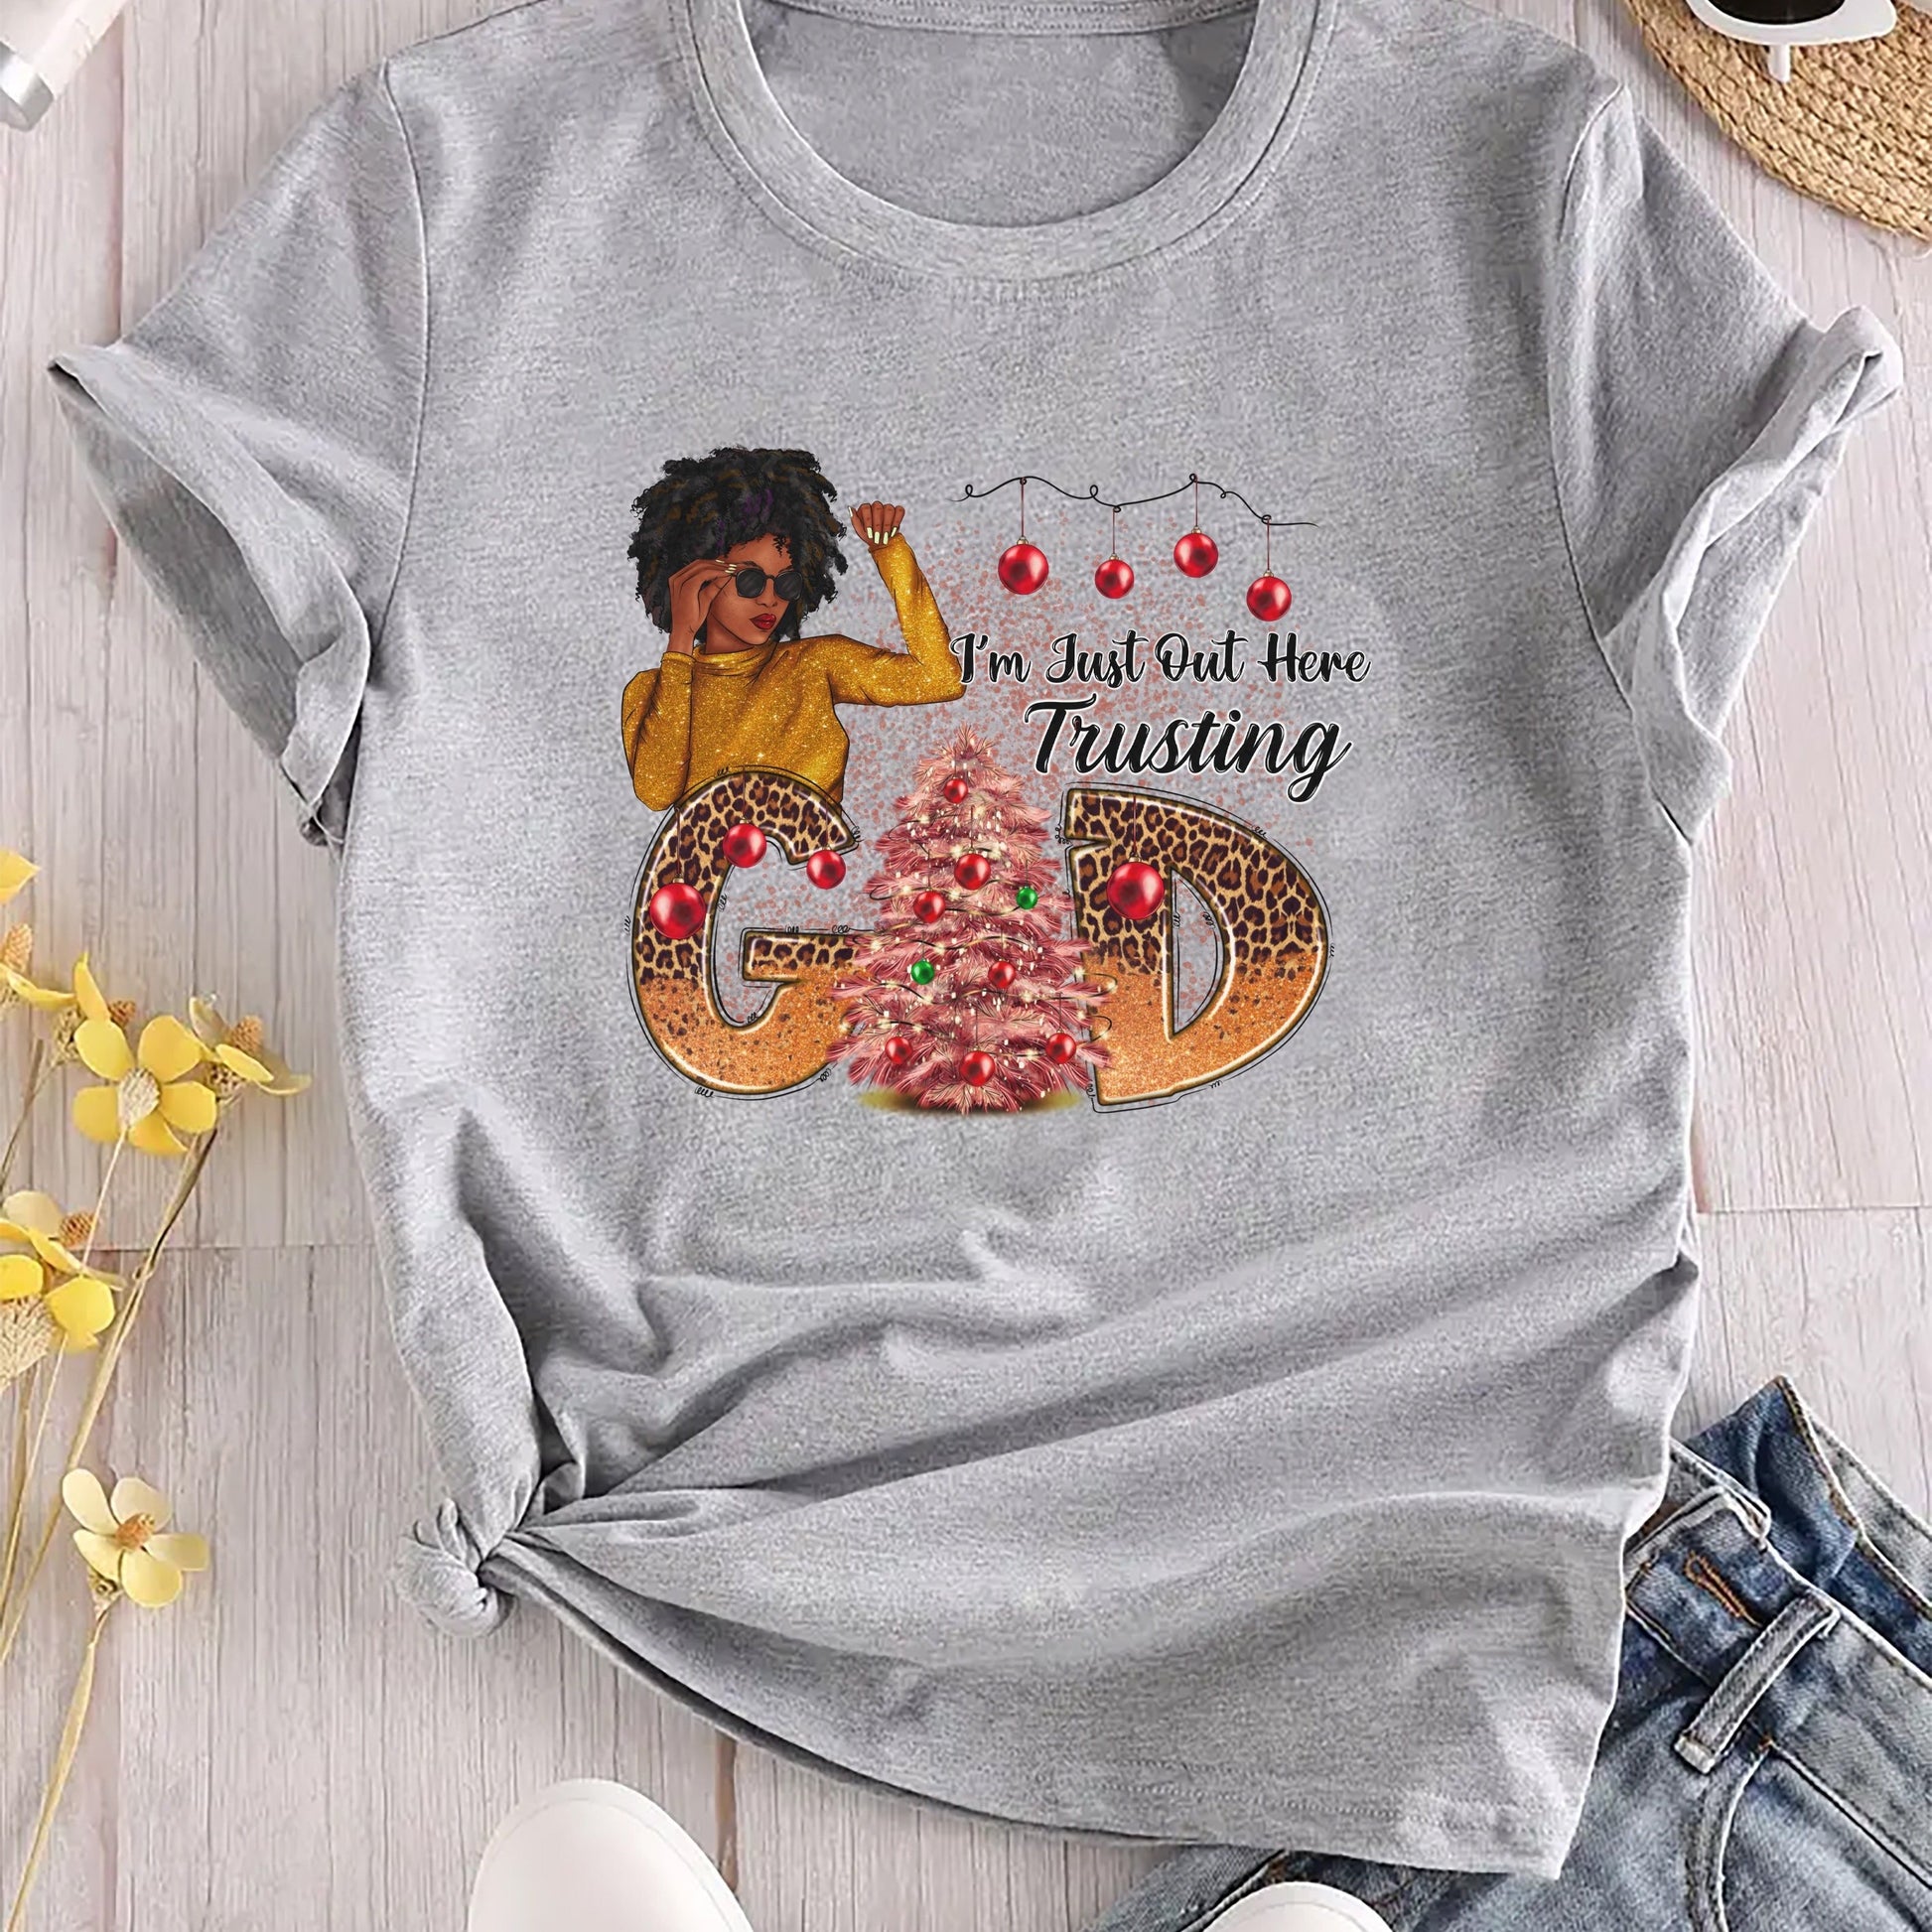 I'm Just Out Here Trusting God (Christmas themed) Women's Christian T-Shirt claimedbygoddesigns